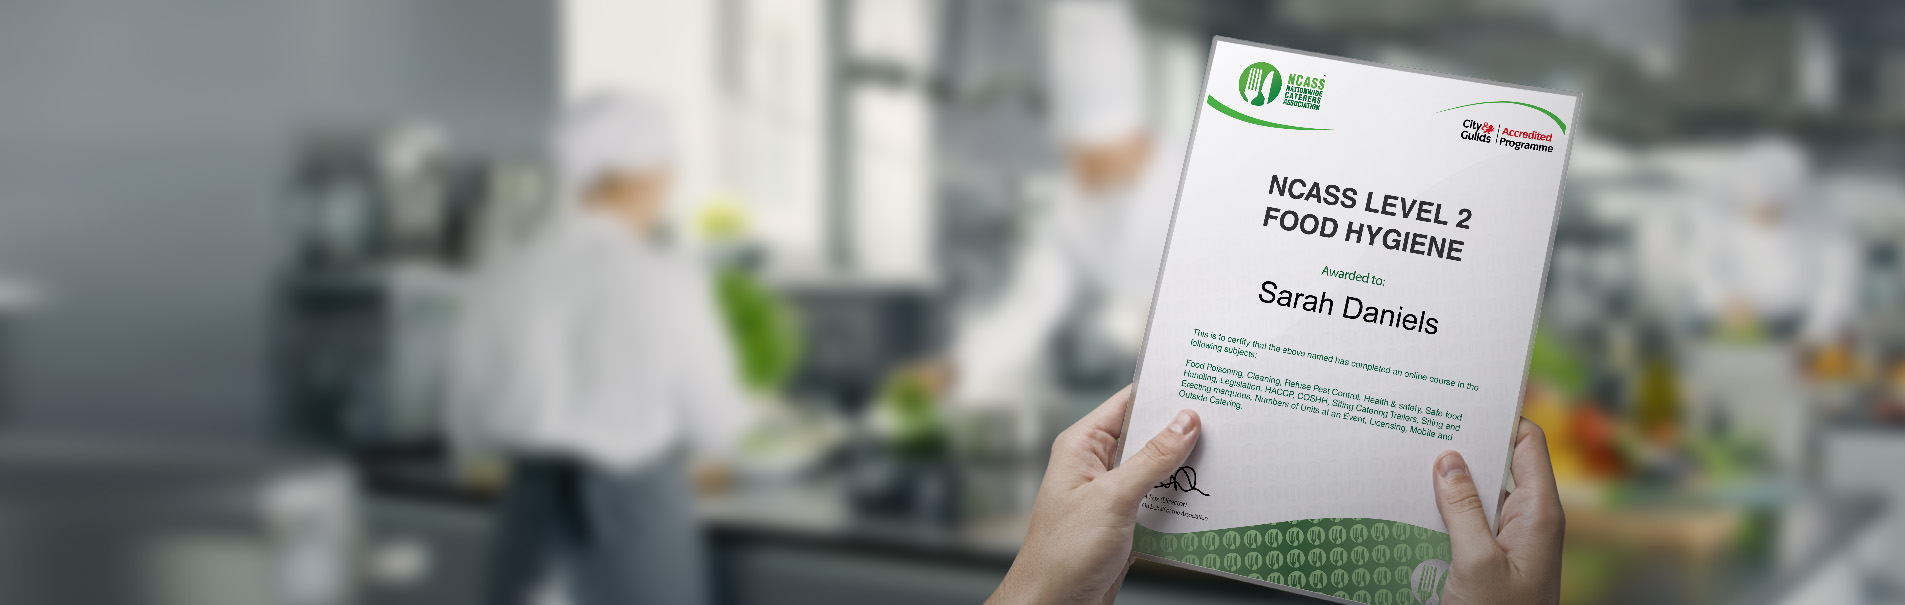 Level 2 Food Hygiene Certificate - Nationwide Caterers Association